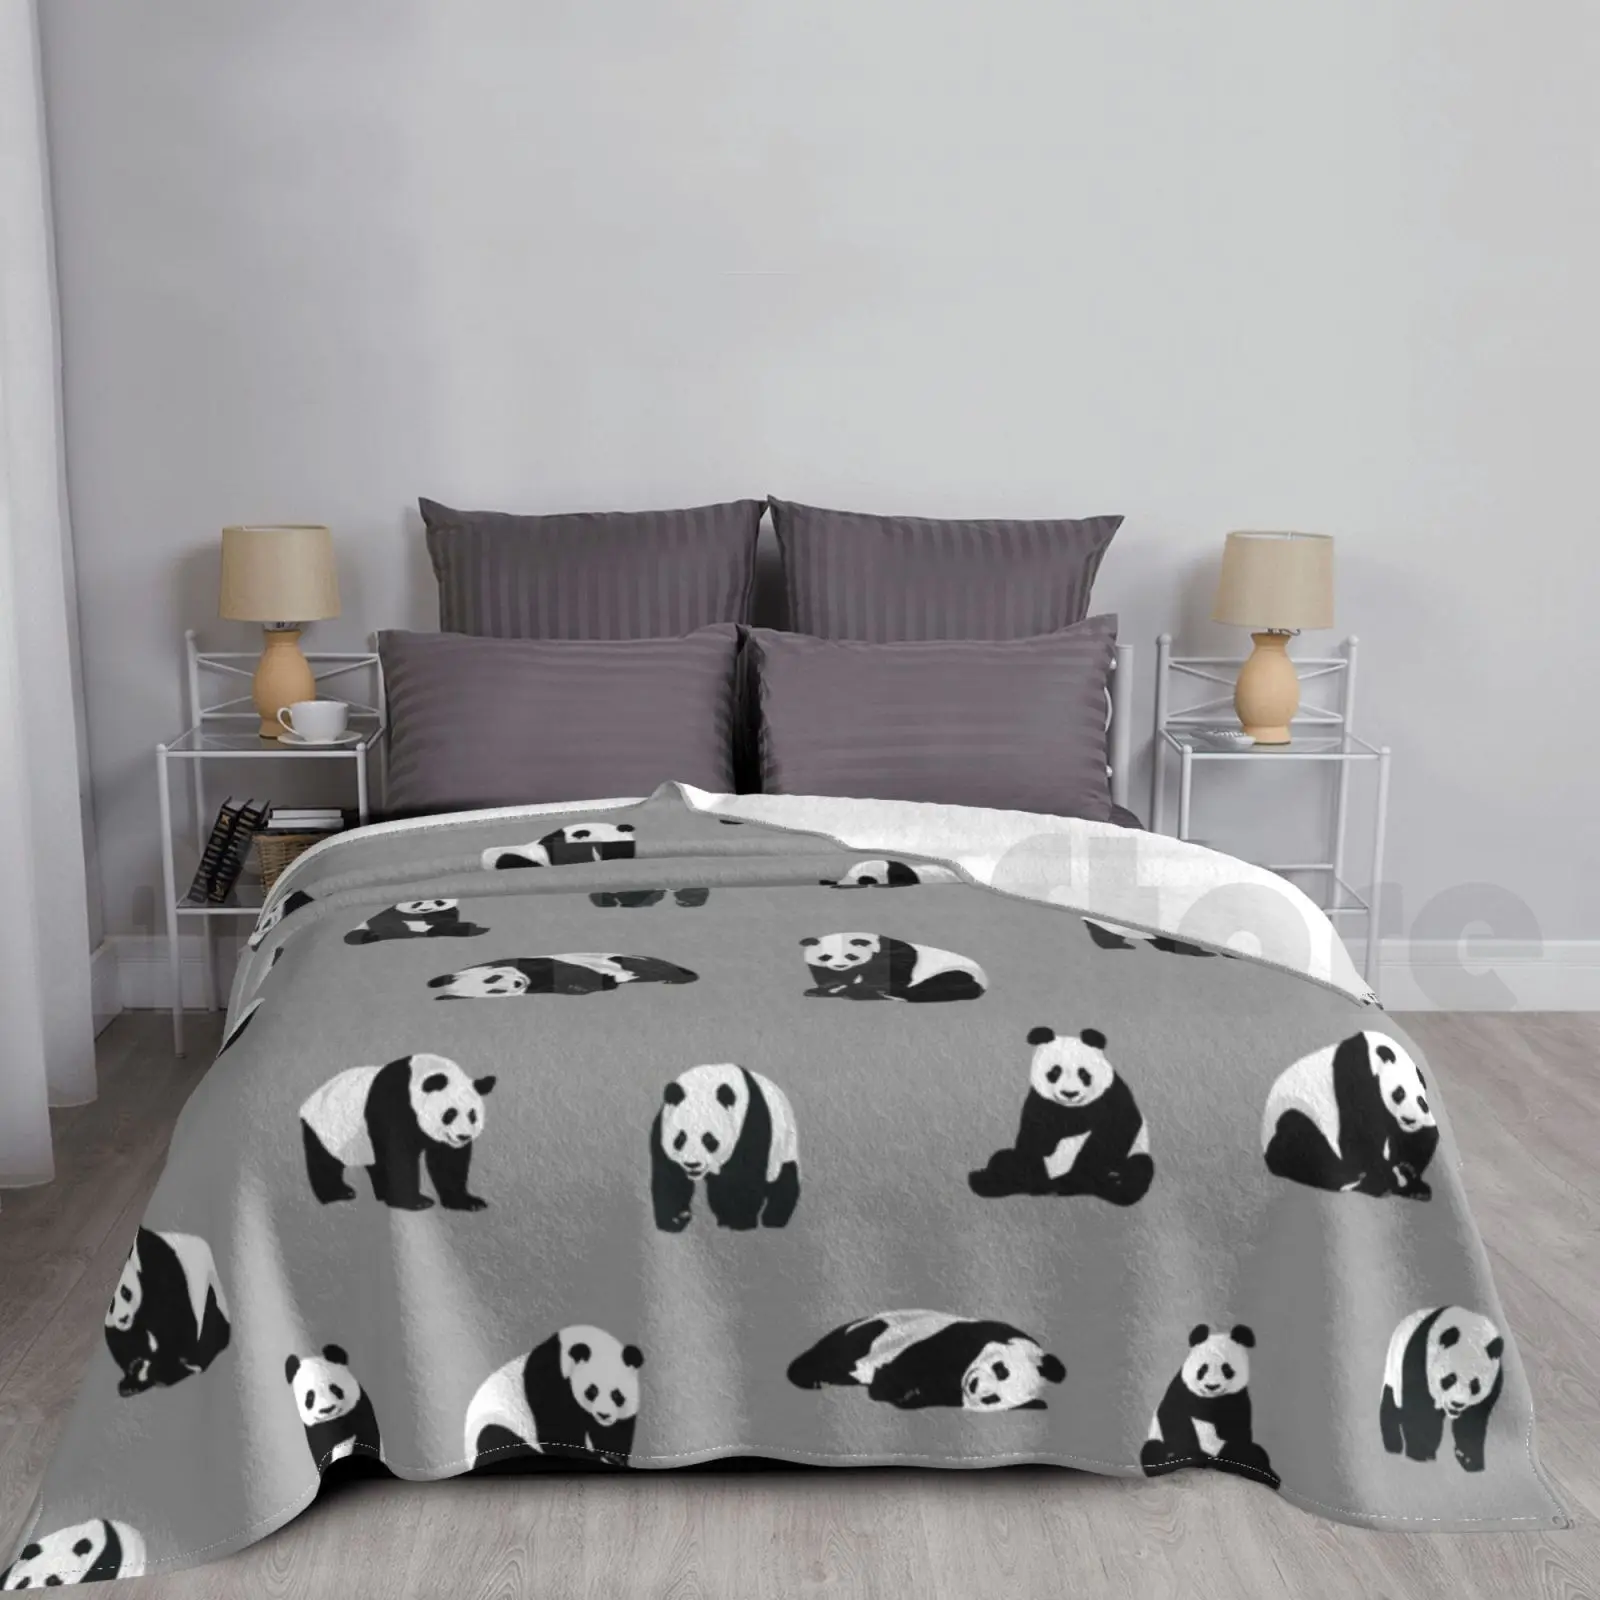 

Pandas On Grey Blanket For Sofa Bed Travel Panda Pandas Zoo Wild Wild Animal Animal Animals Safari Jungle